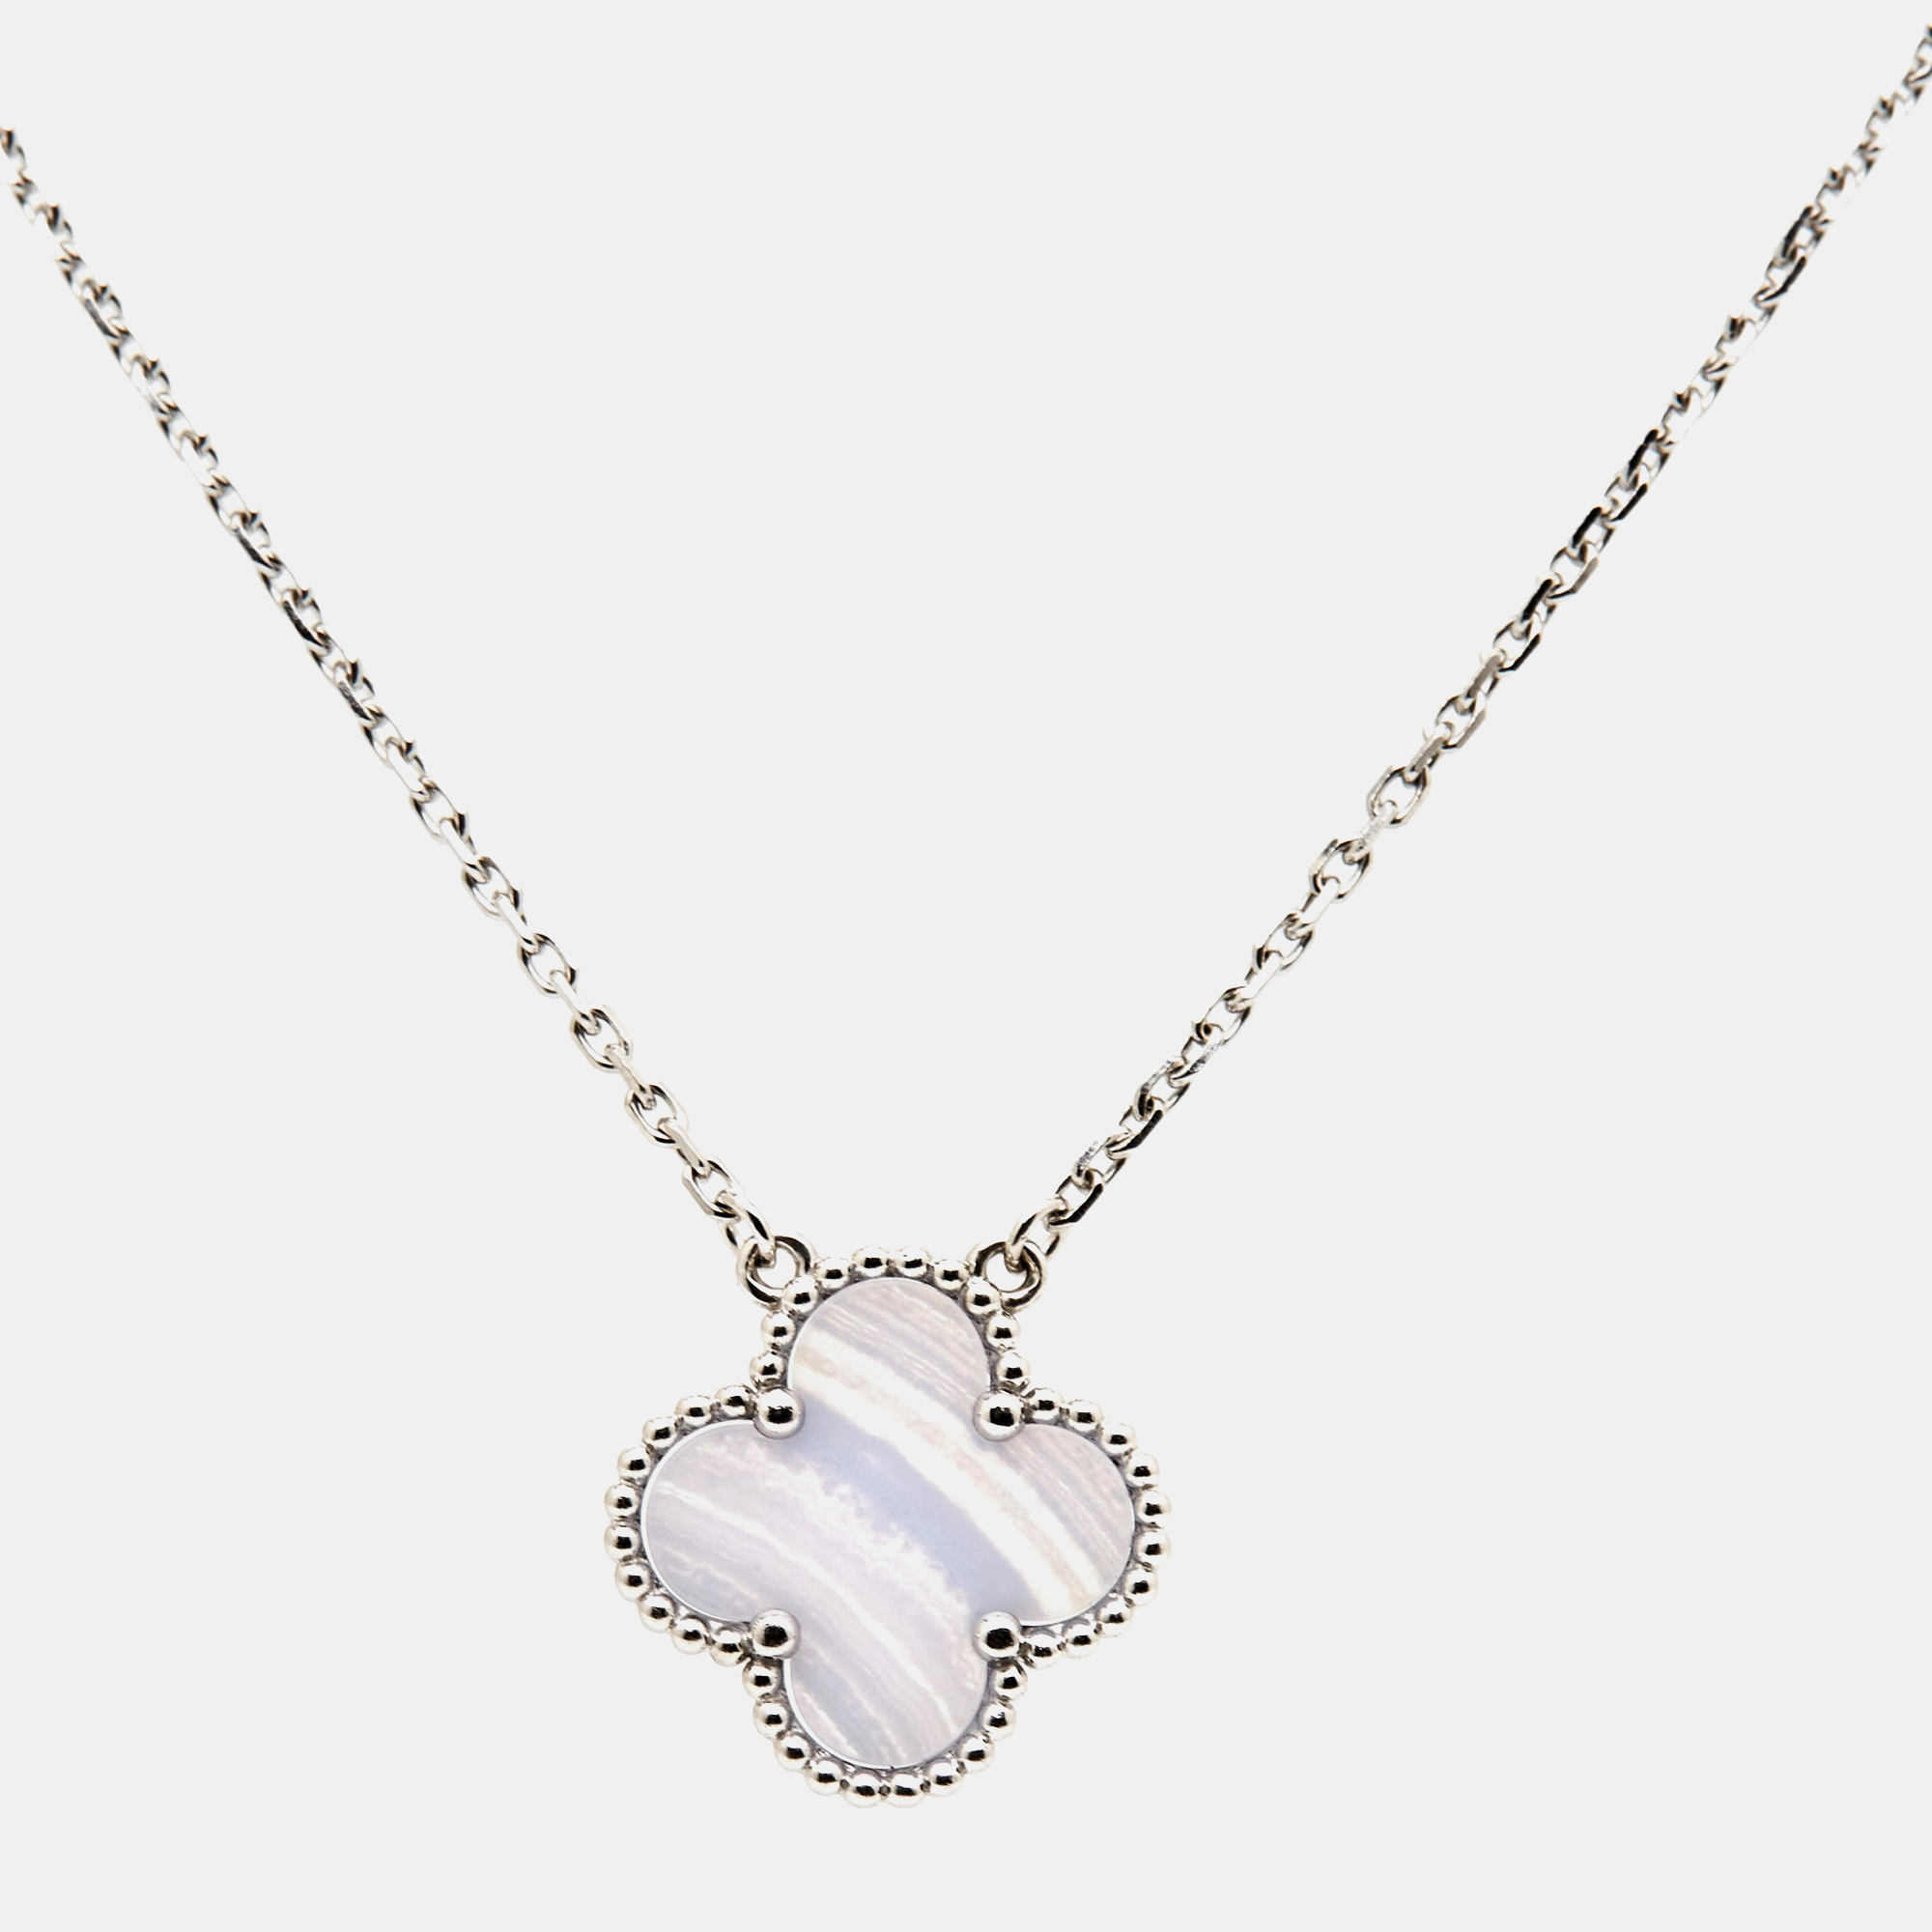 Pre-owned Van Cleef & Arpels Vintage Alhambra Chalcedony 18k White Gold Pendant Necklace